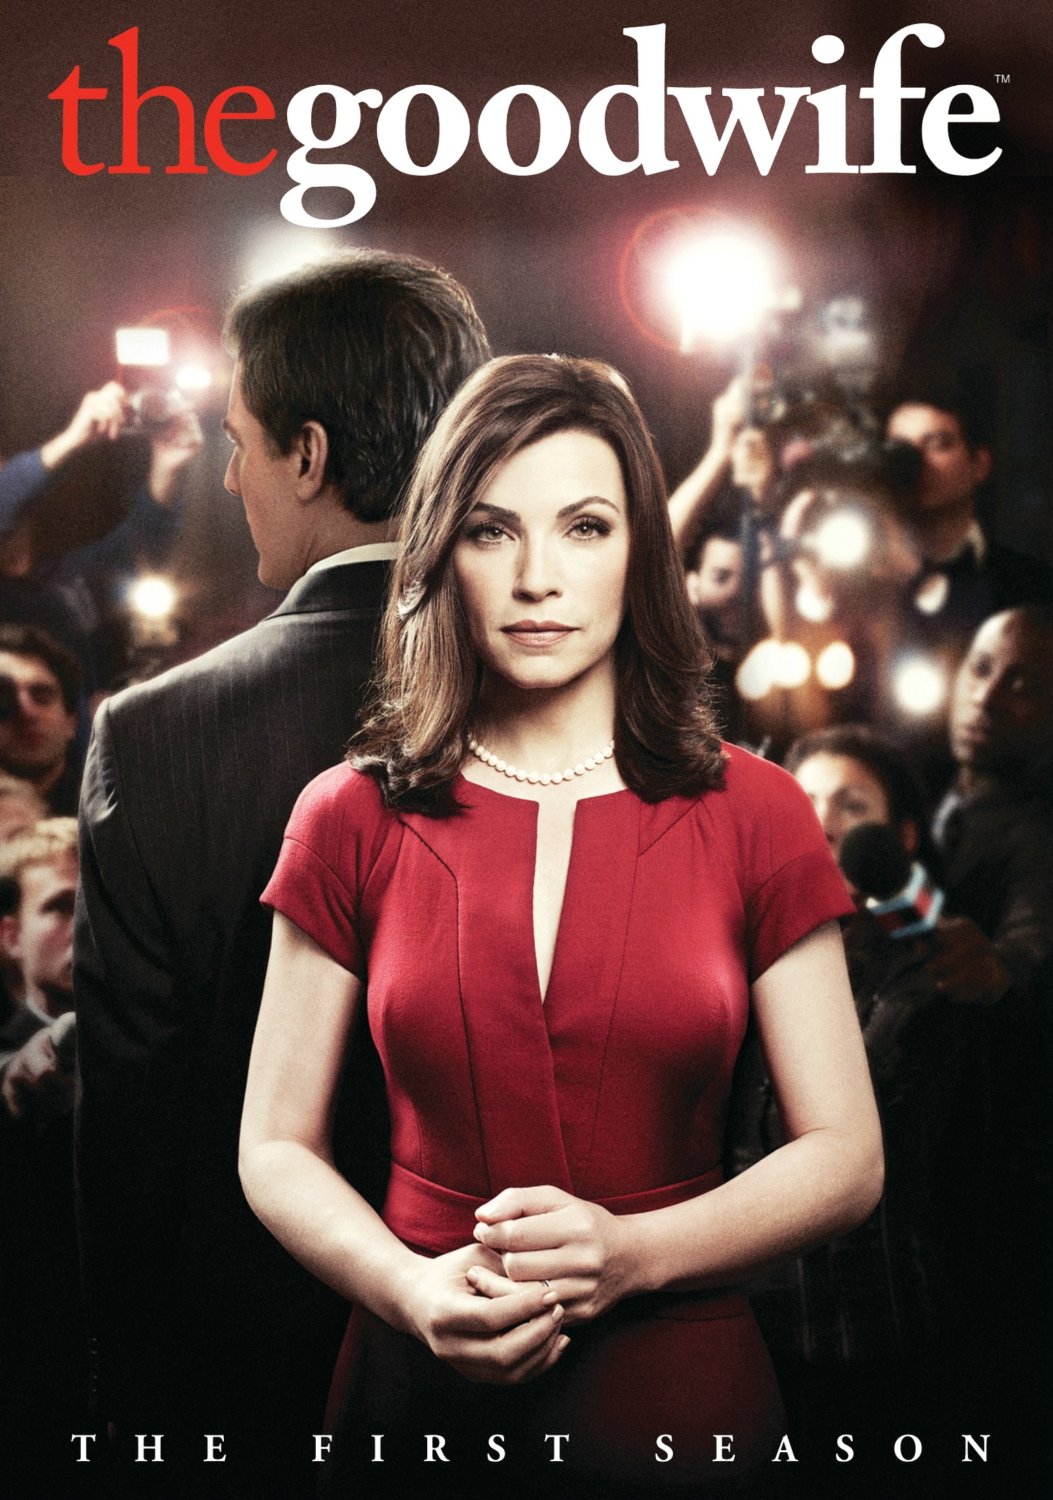 The Good Wife #8